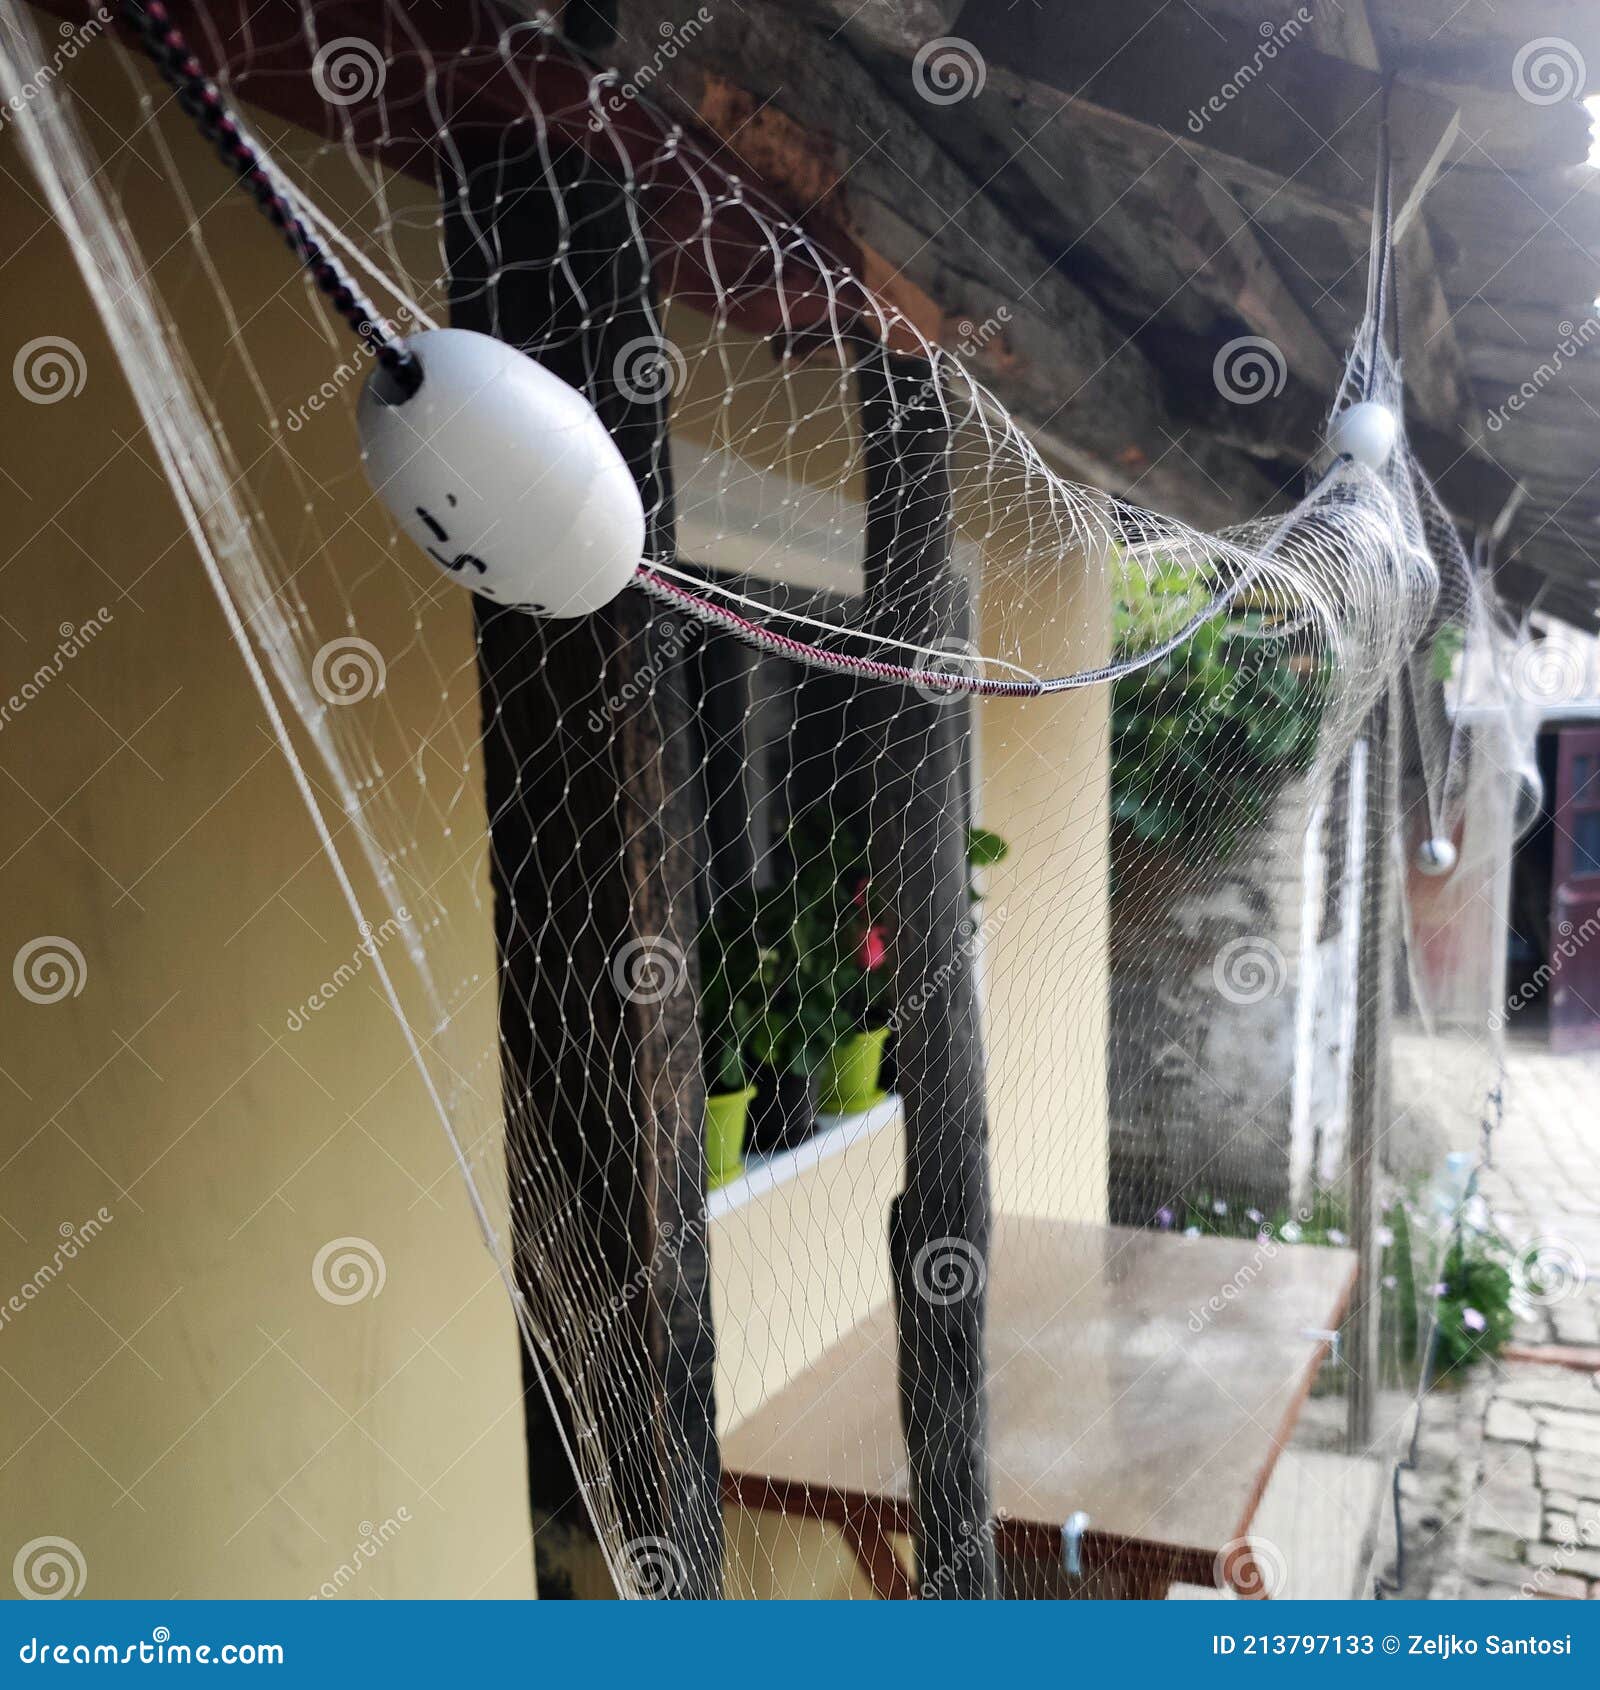 Fishing Net Hanged on the Roof Stock Image - Image of fishing, attached:  213797133